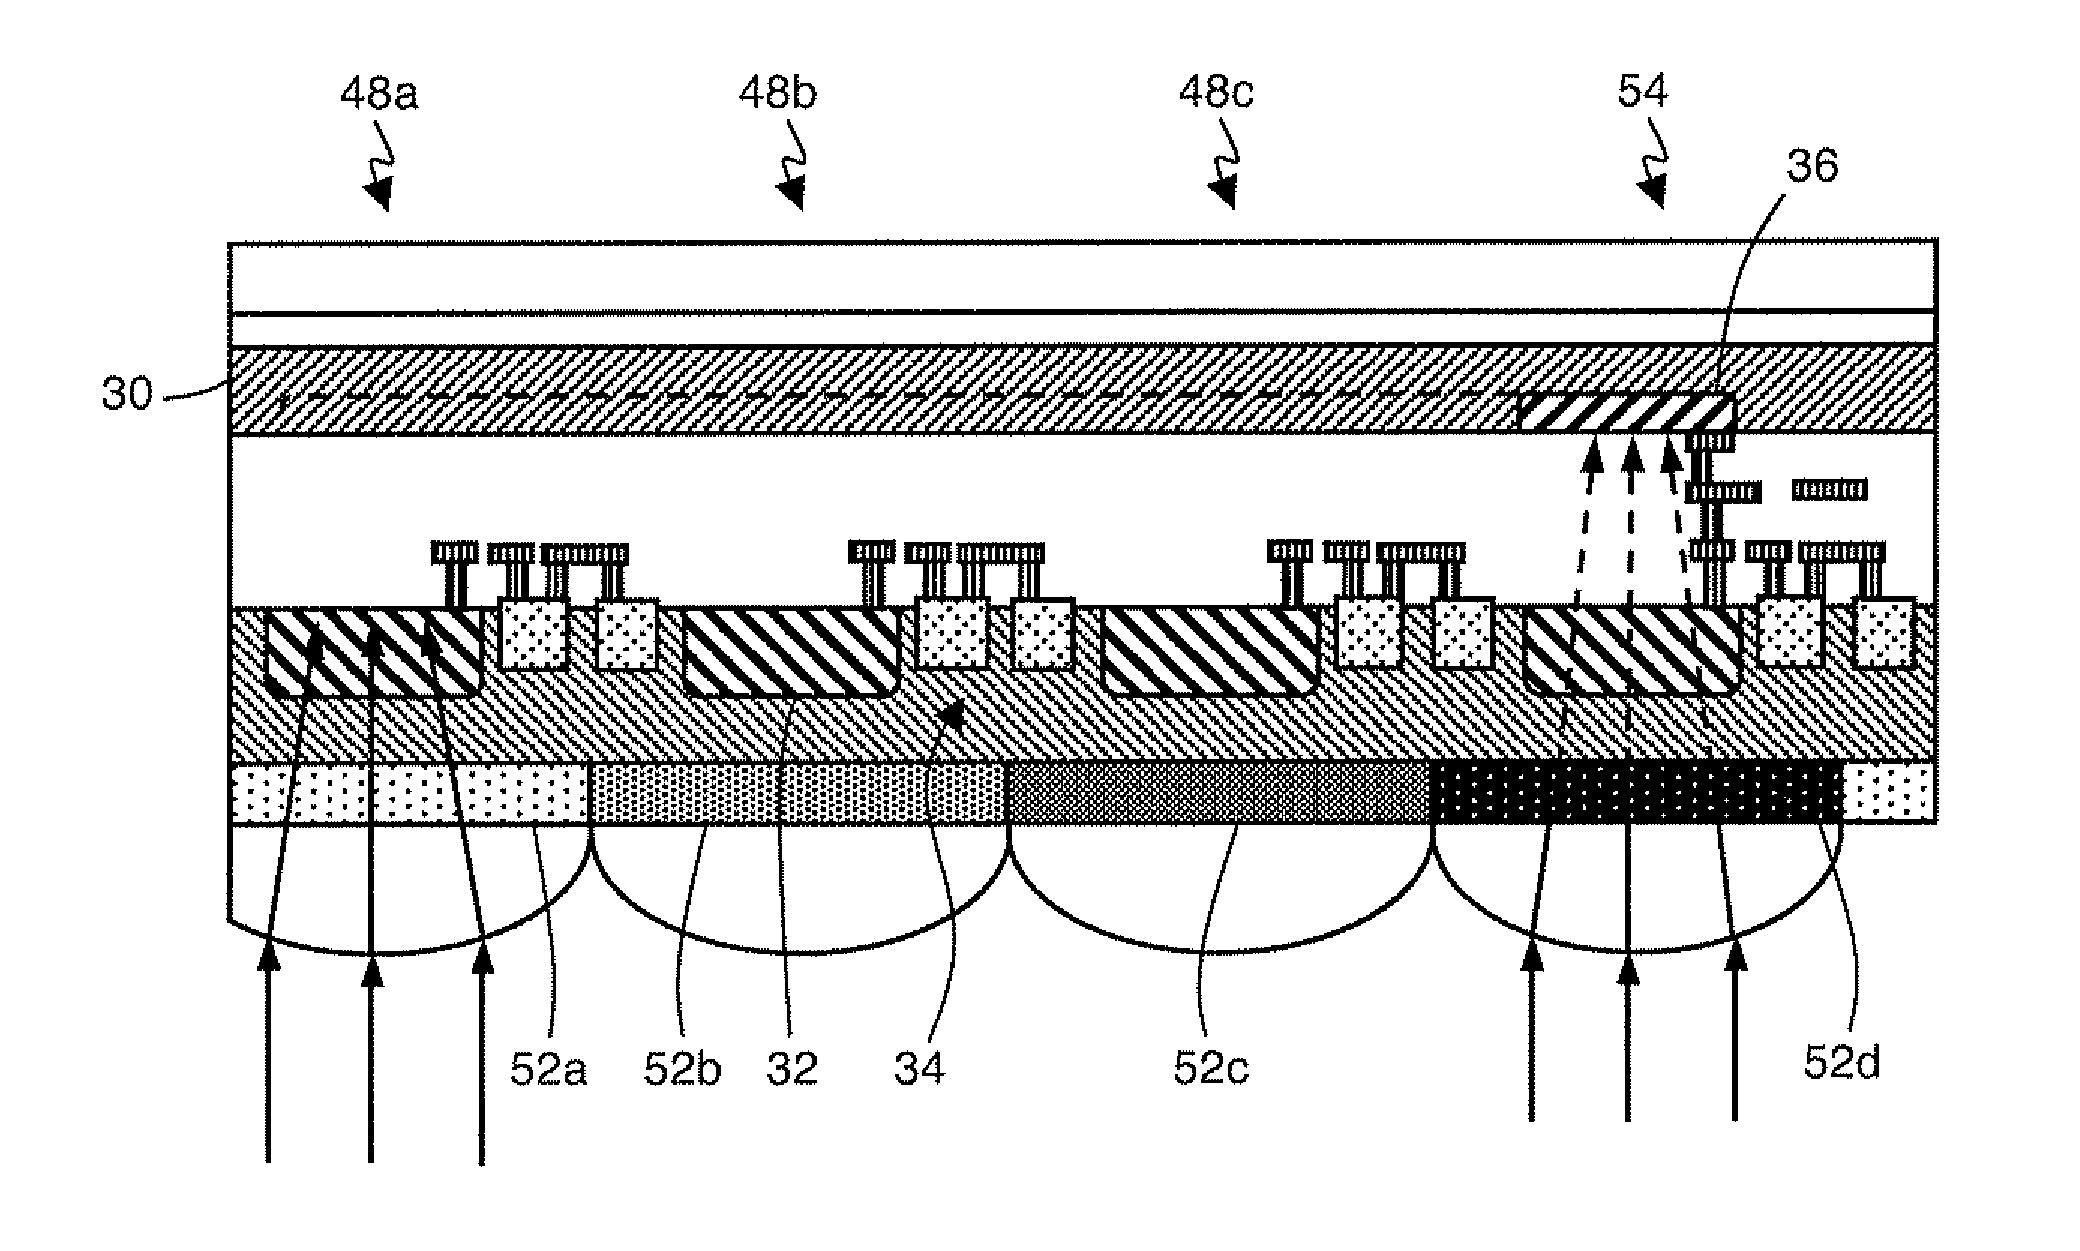 Visible and near-infrared radiation detector